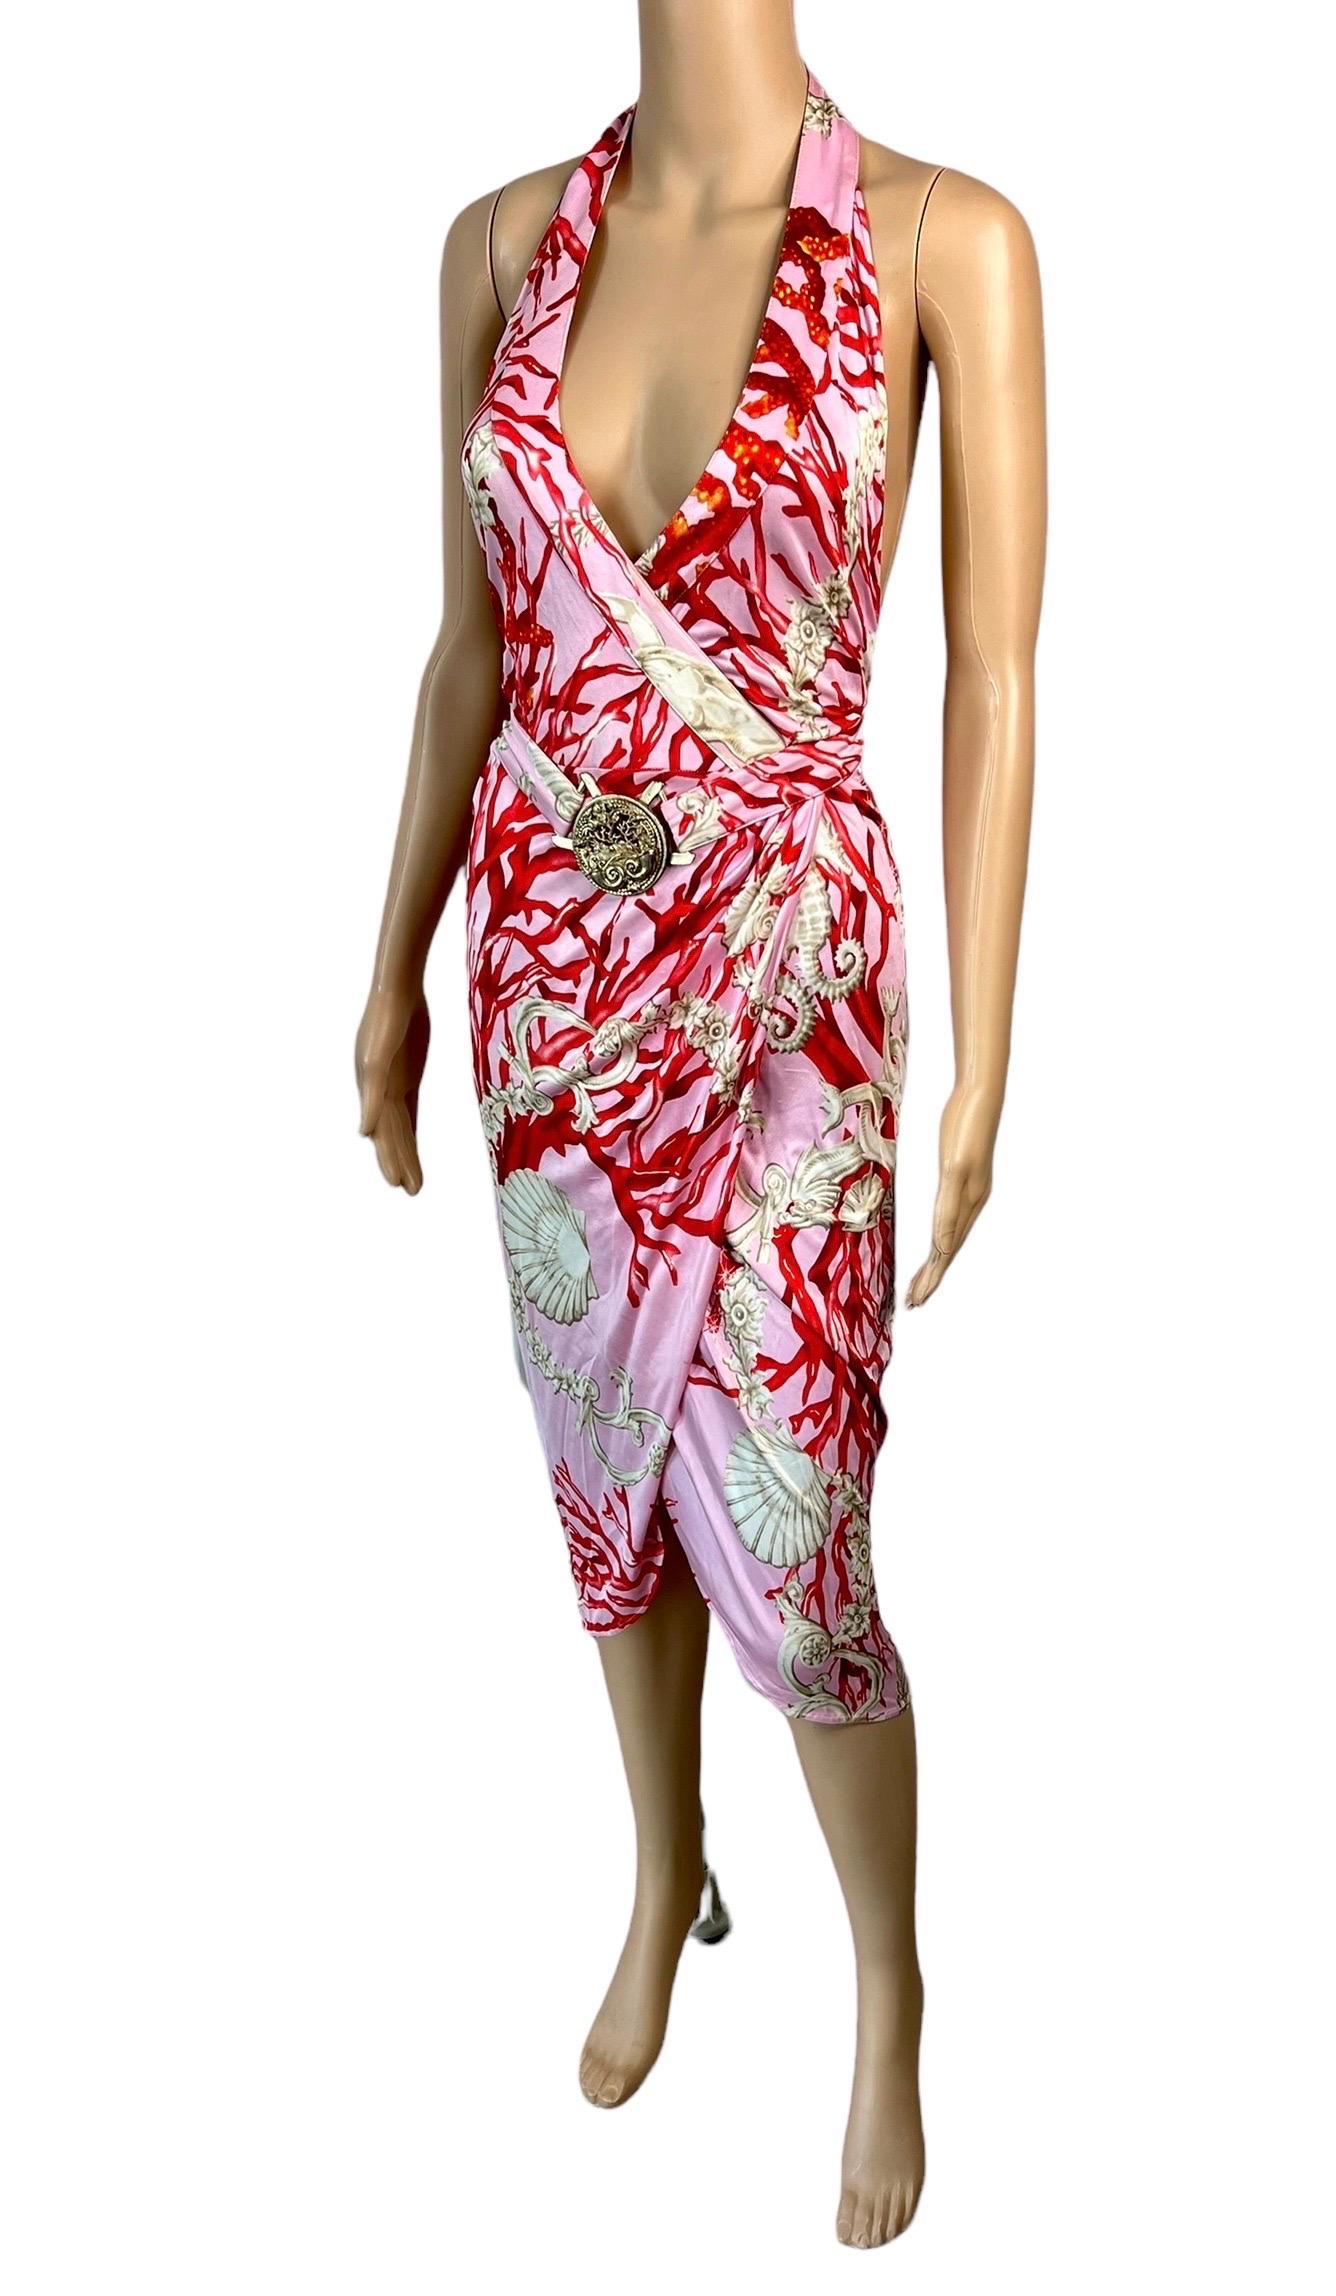 Versace S/S 2005 Plunging Neckline Backless Seashell Print Belted Wrap Dress In Good Condition For Sale In Naples, FL